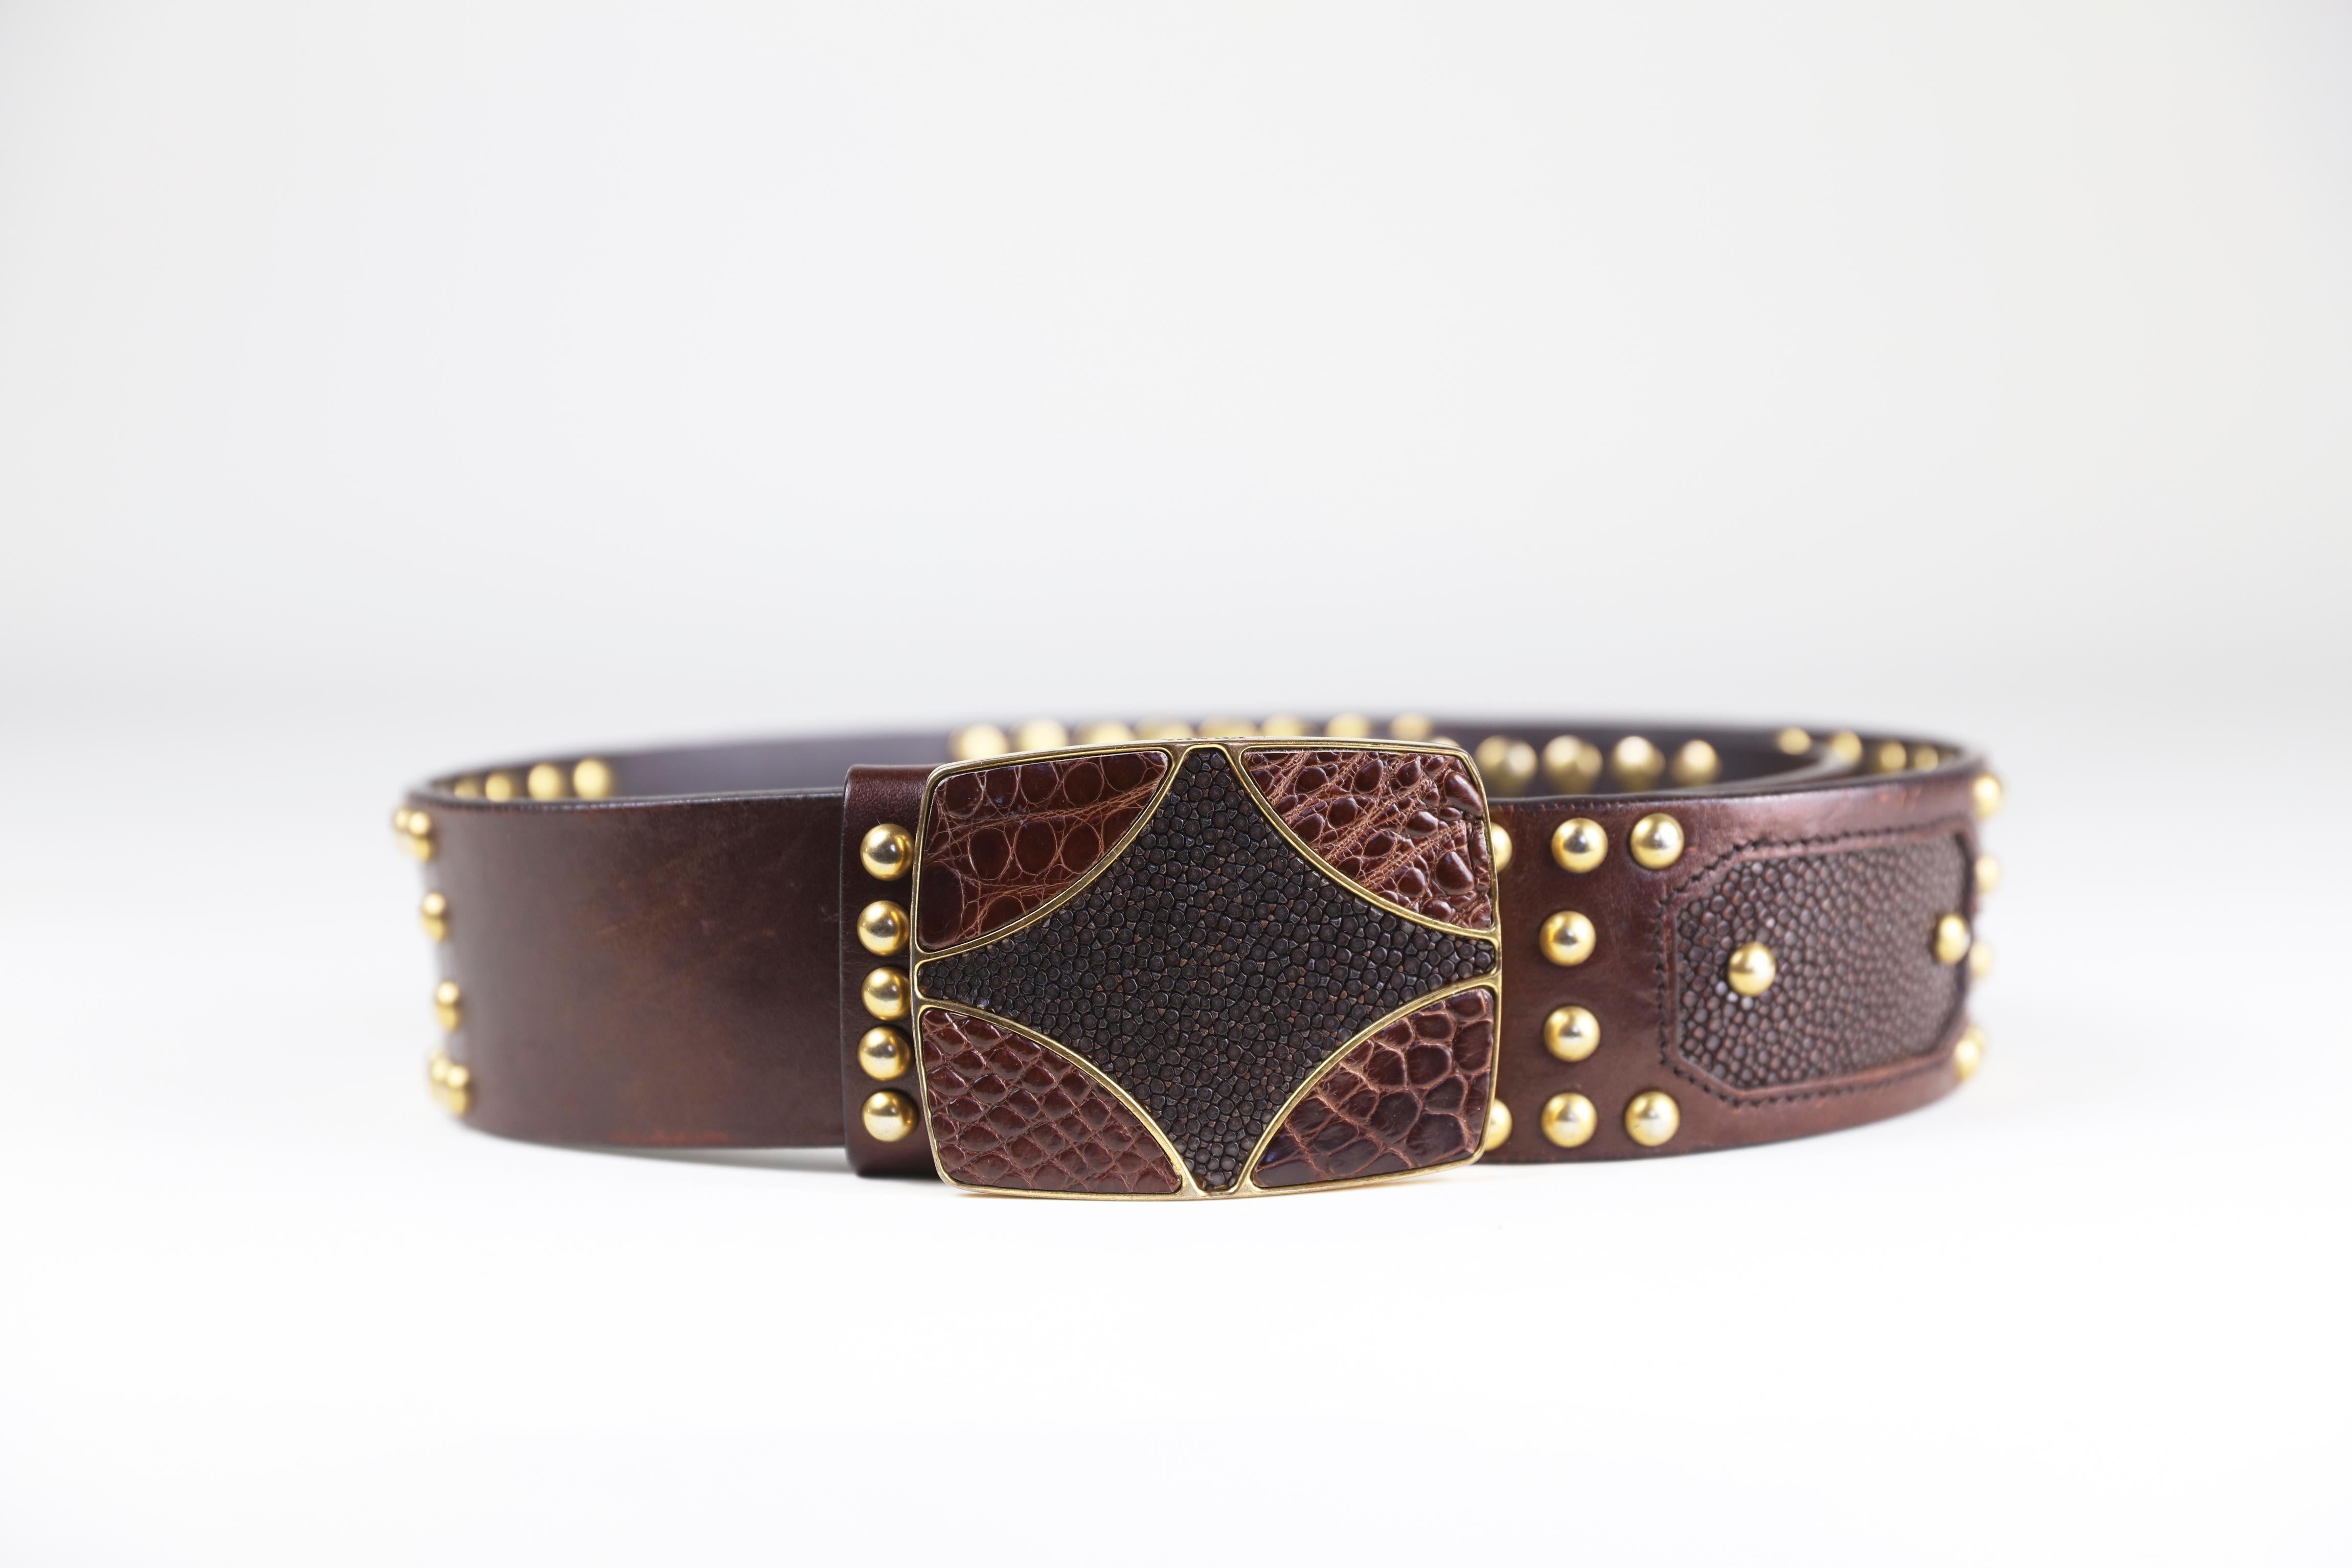 Black Prada Brown Size 32 Leather Studded Belt with Buckle